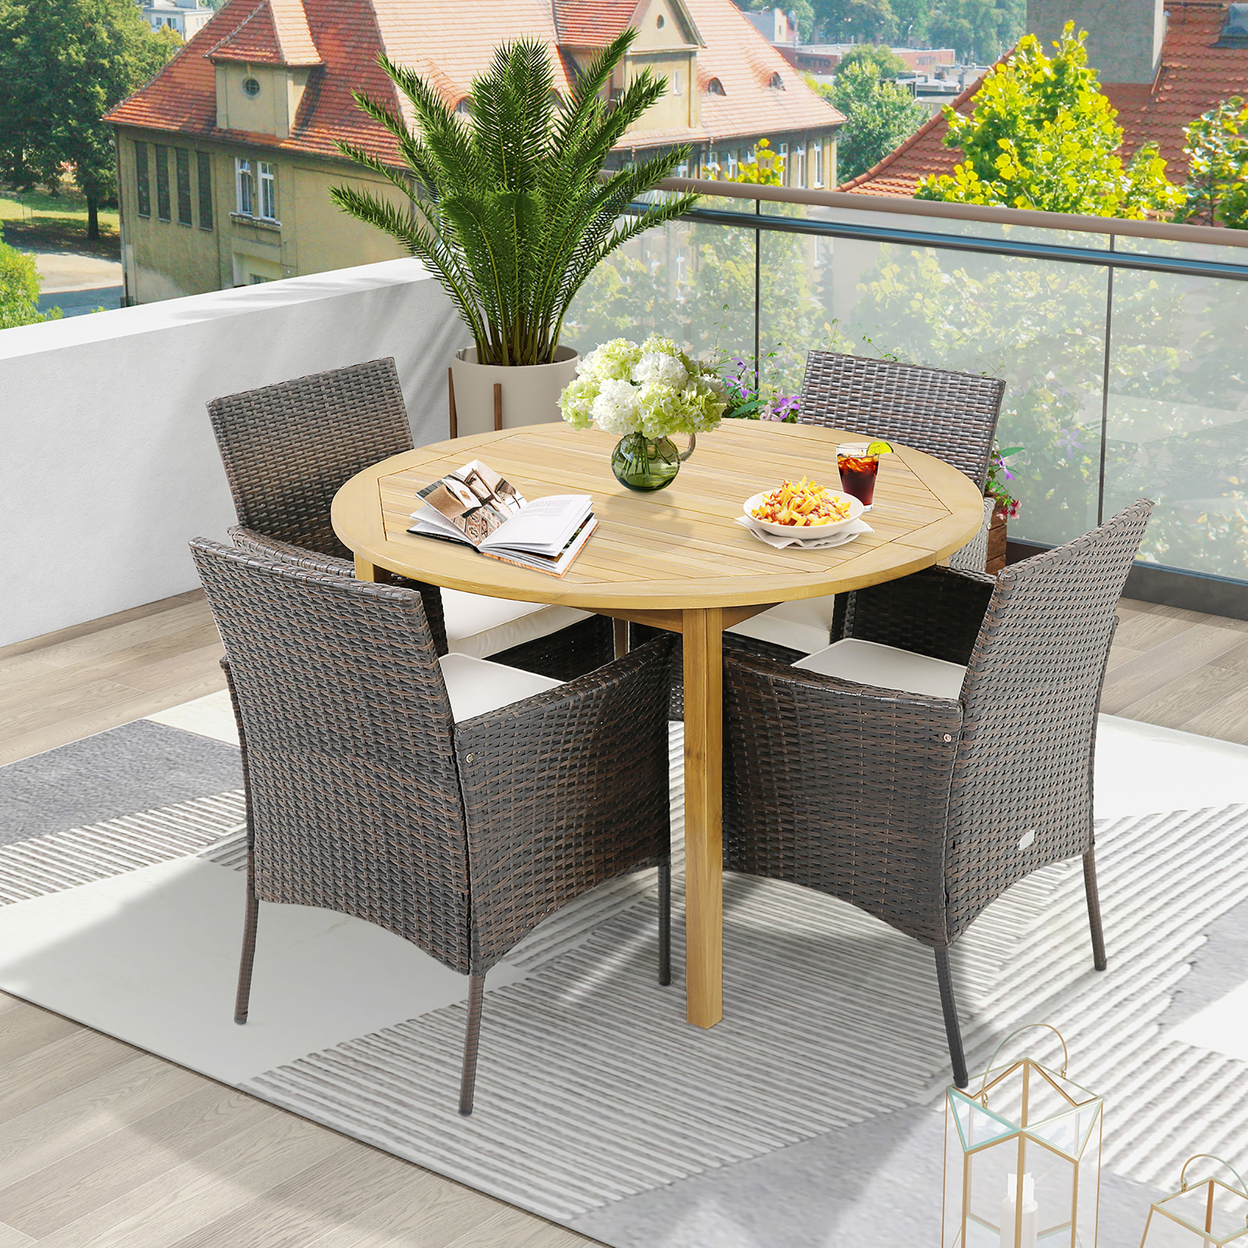 Patio Dining Chairs Set Of 4 Outdoor PE Wicker Chairs W/ Removable Cushions Brown & Off White